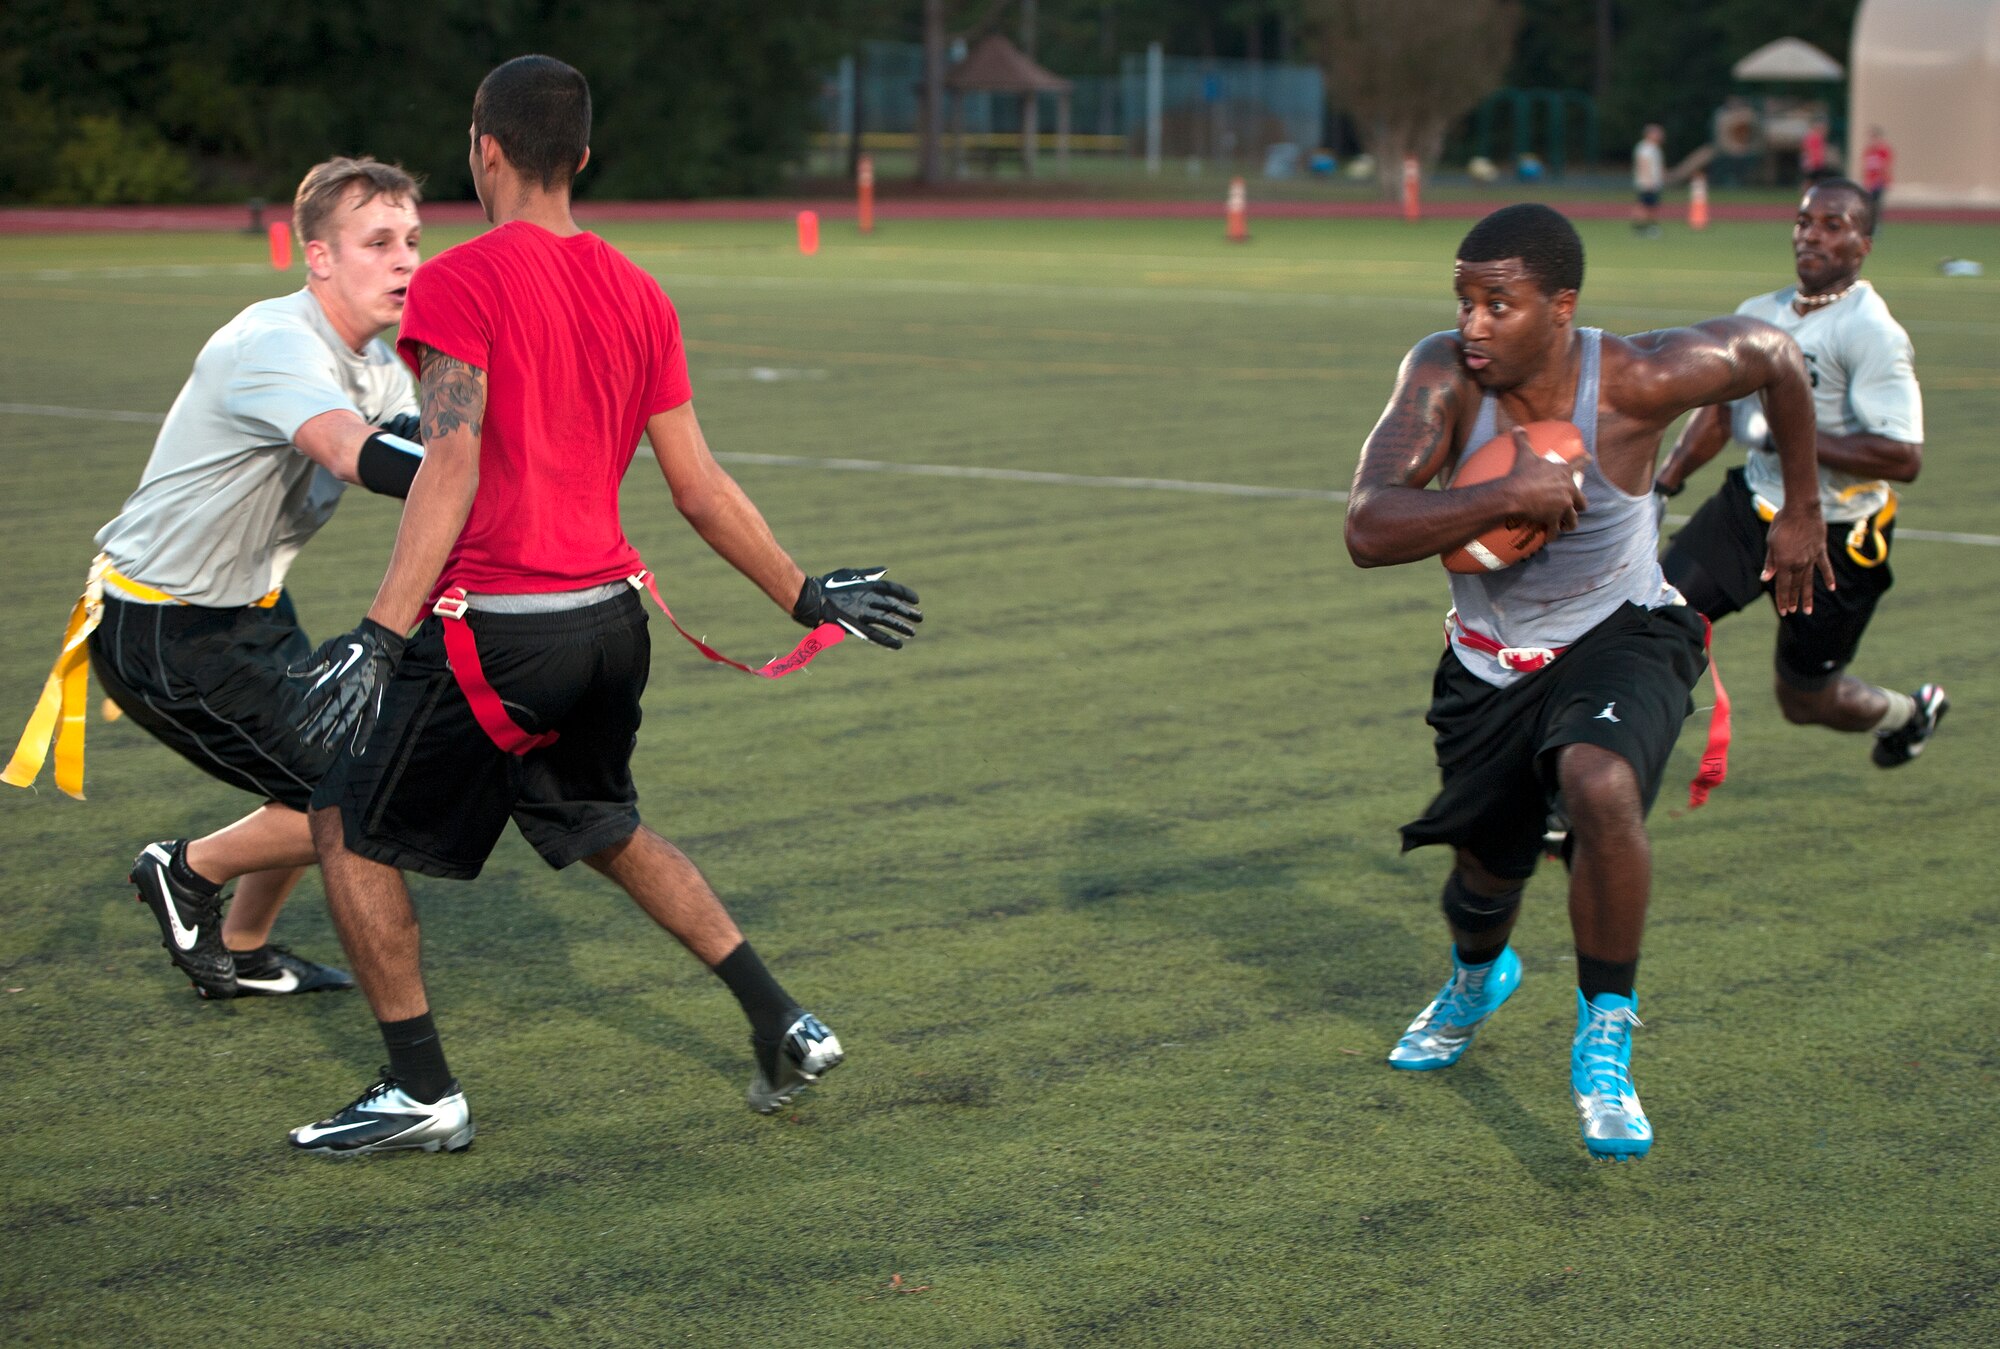 Derrick Raley, 1st Special Operations Force Support Squadron quarterback, dashes through defensive linemen during an intramural flag football game on Hurlburt Field, Fla., Oct. 21, 2014. The 1st SOFSS team finished as a finalist in the 2013 Flag Football Tournament. (U.S. Air Force photo/Senior Airman Kentavist P. Brackin)